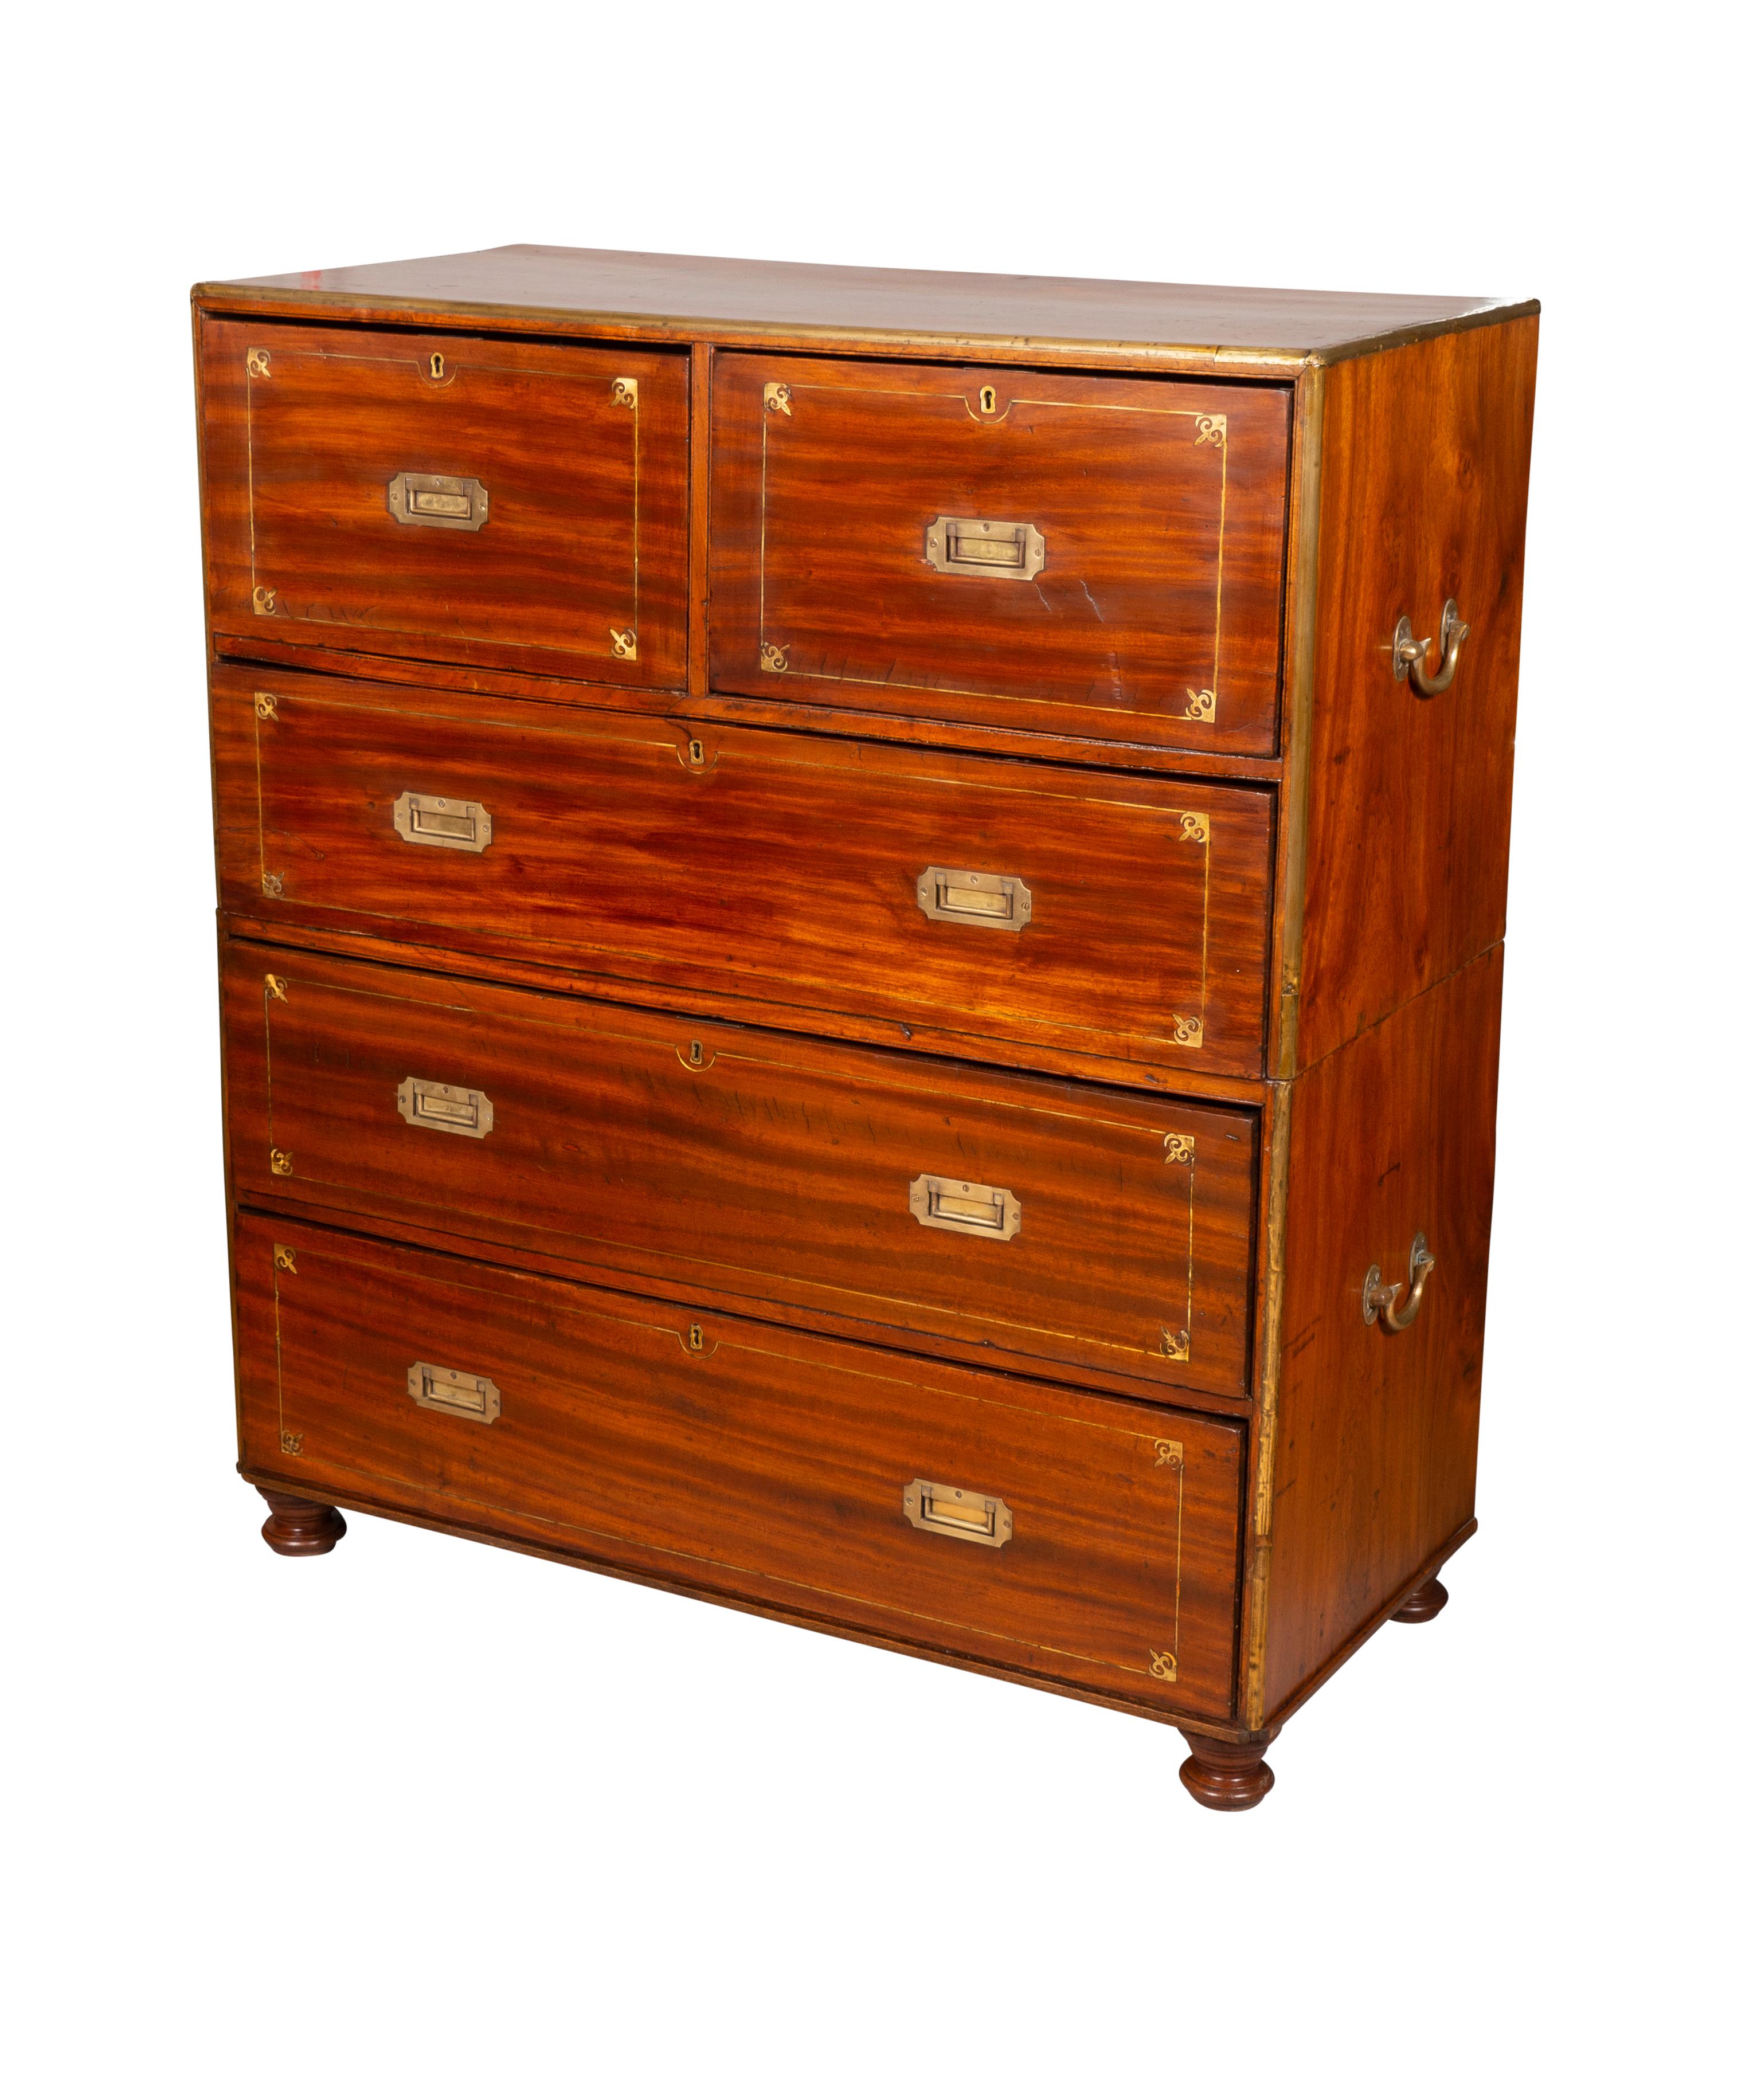 Chinese Export Mahogany and Brass Inlaid Campaign Chest For Sale 2